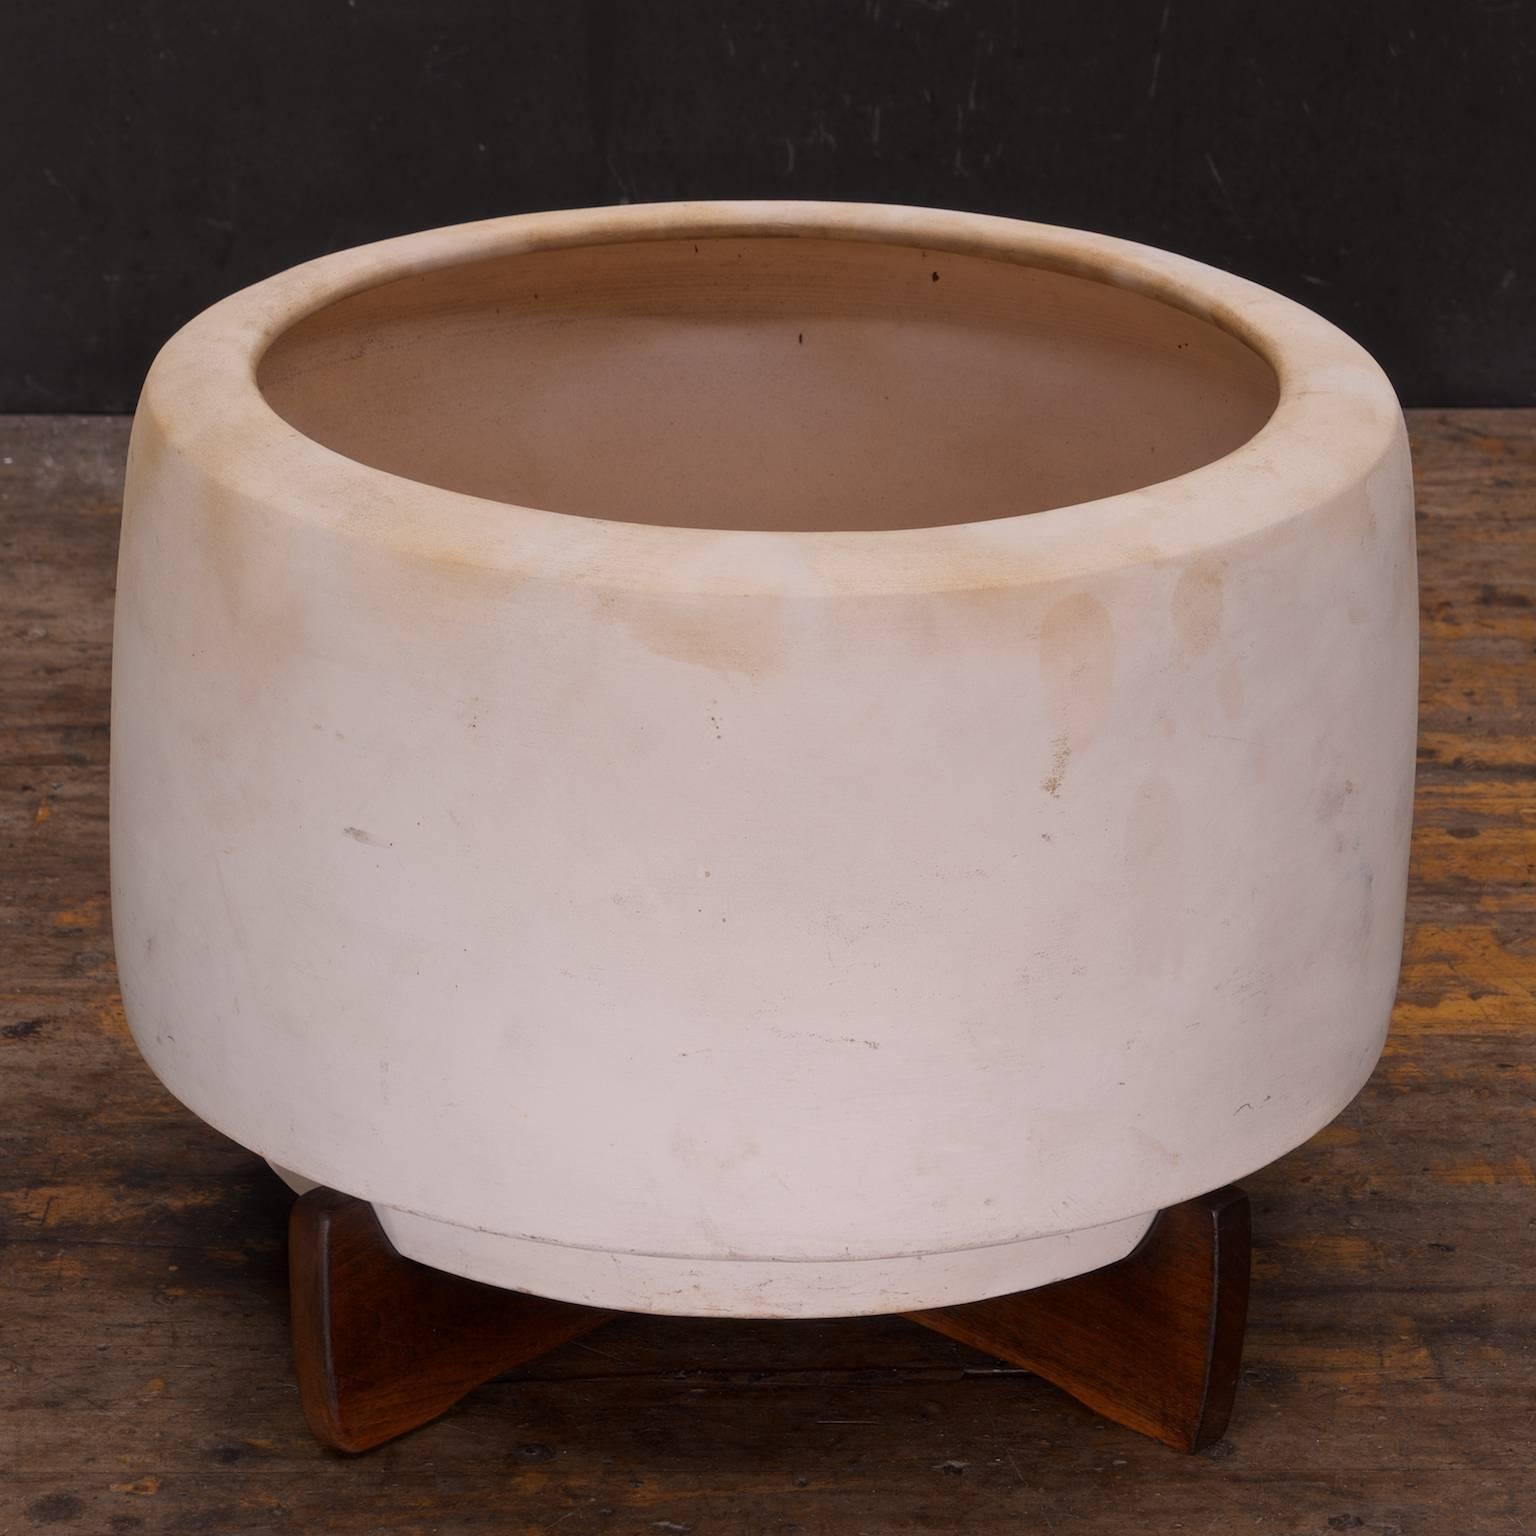 AP (Architectural Pottery) Pot, called the 